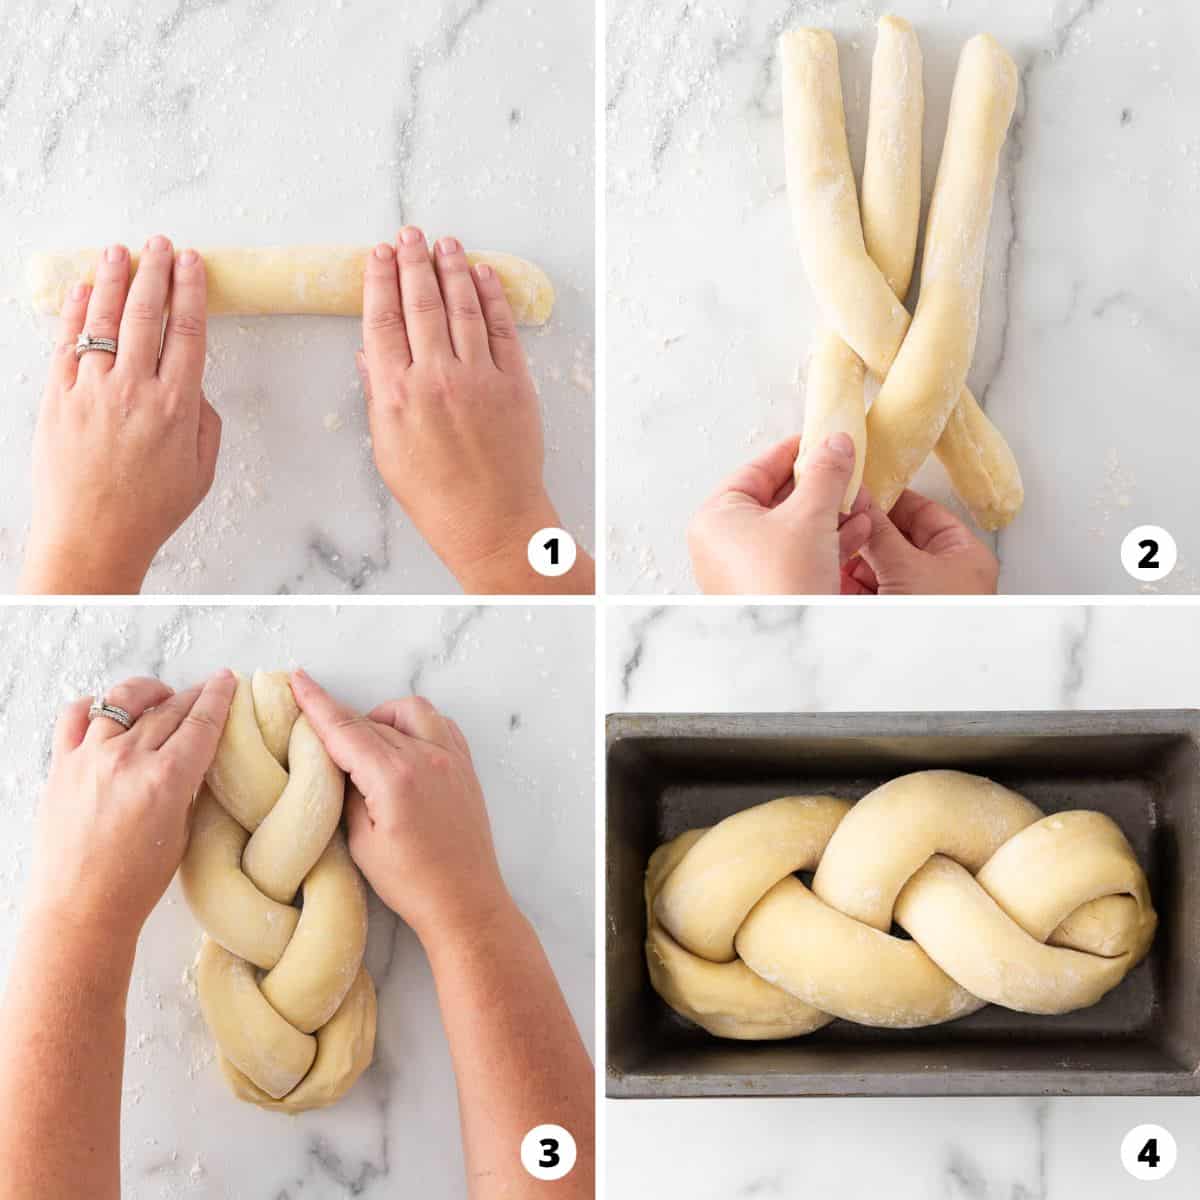 Showing how to braid the bread in a 4 step collage. 